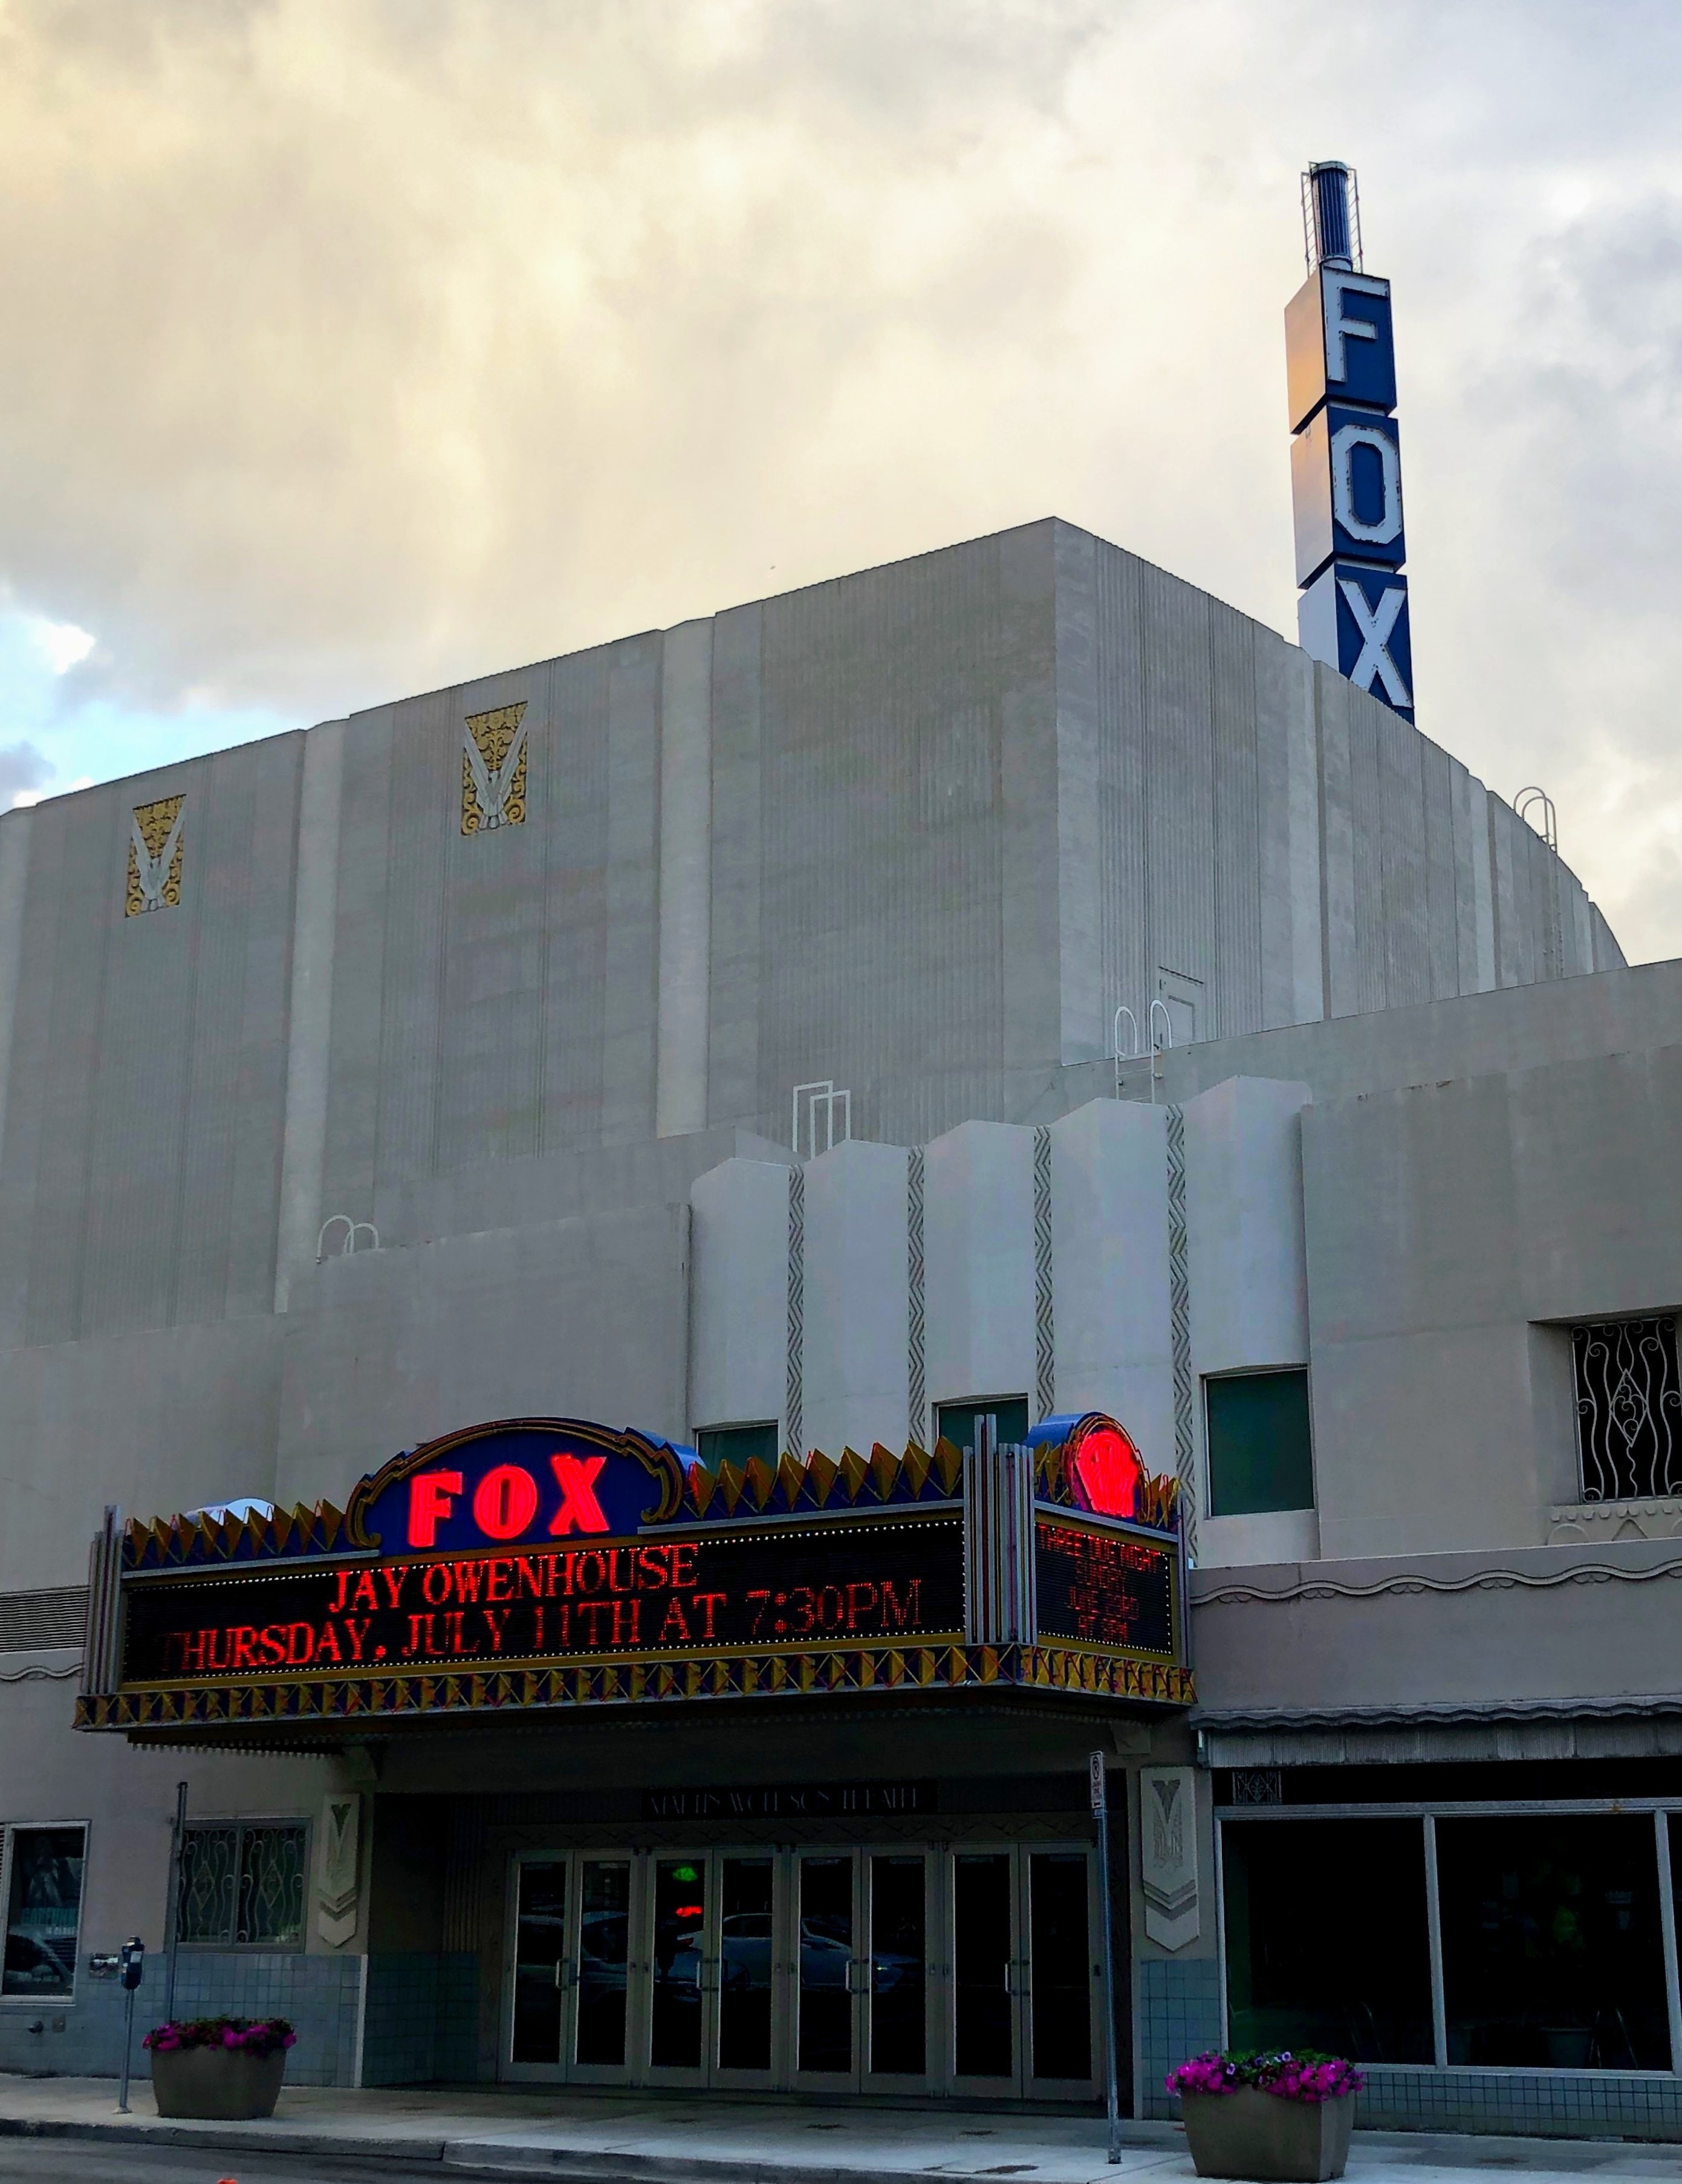 The Fox Theater in Spokane, Washington is a 1931 Art Deco movie theater. It was designed by architect Robert C. Reamer, notable for his design of the Old Faithful Inn in Yellowstone Park. It was part of the Fox Film Corporation Empire founded by studio mogul William Fox. Wikipedia (June 2019)

#Trovember